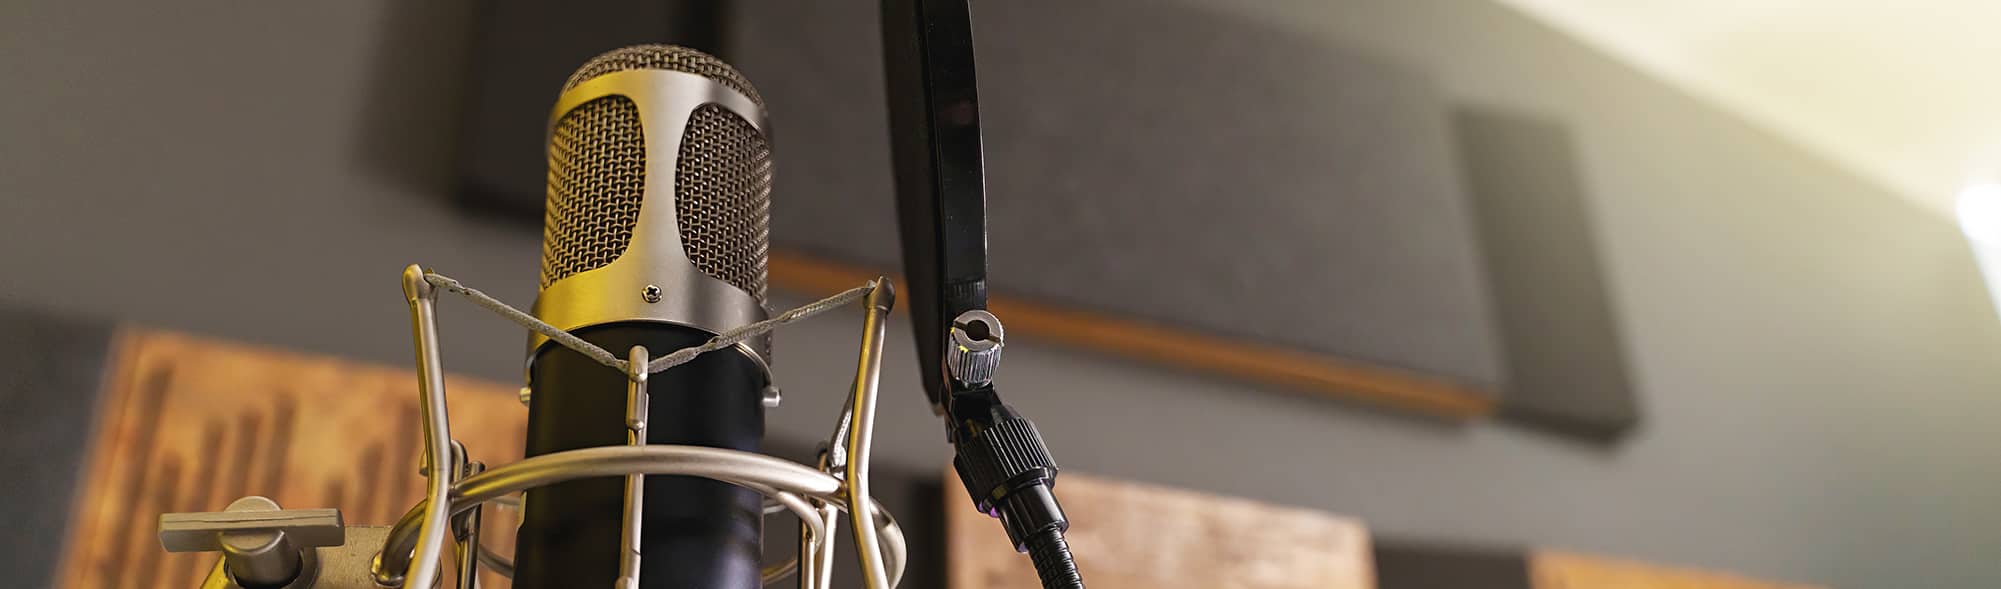 Condenser Microphone in Recording Studio - A close-up of a condenser microphone in a recording studio, with a shallow depth of field. In the blurred background, sound-absorbing panels can be discerned